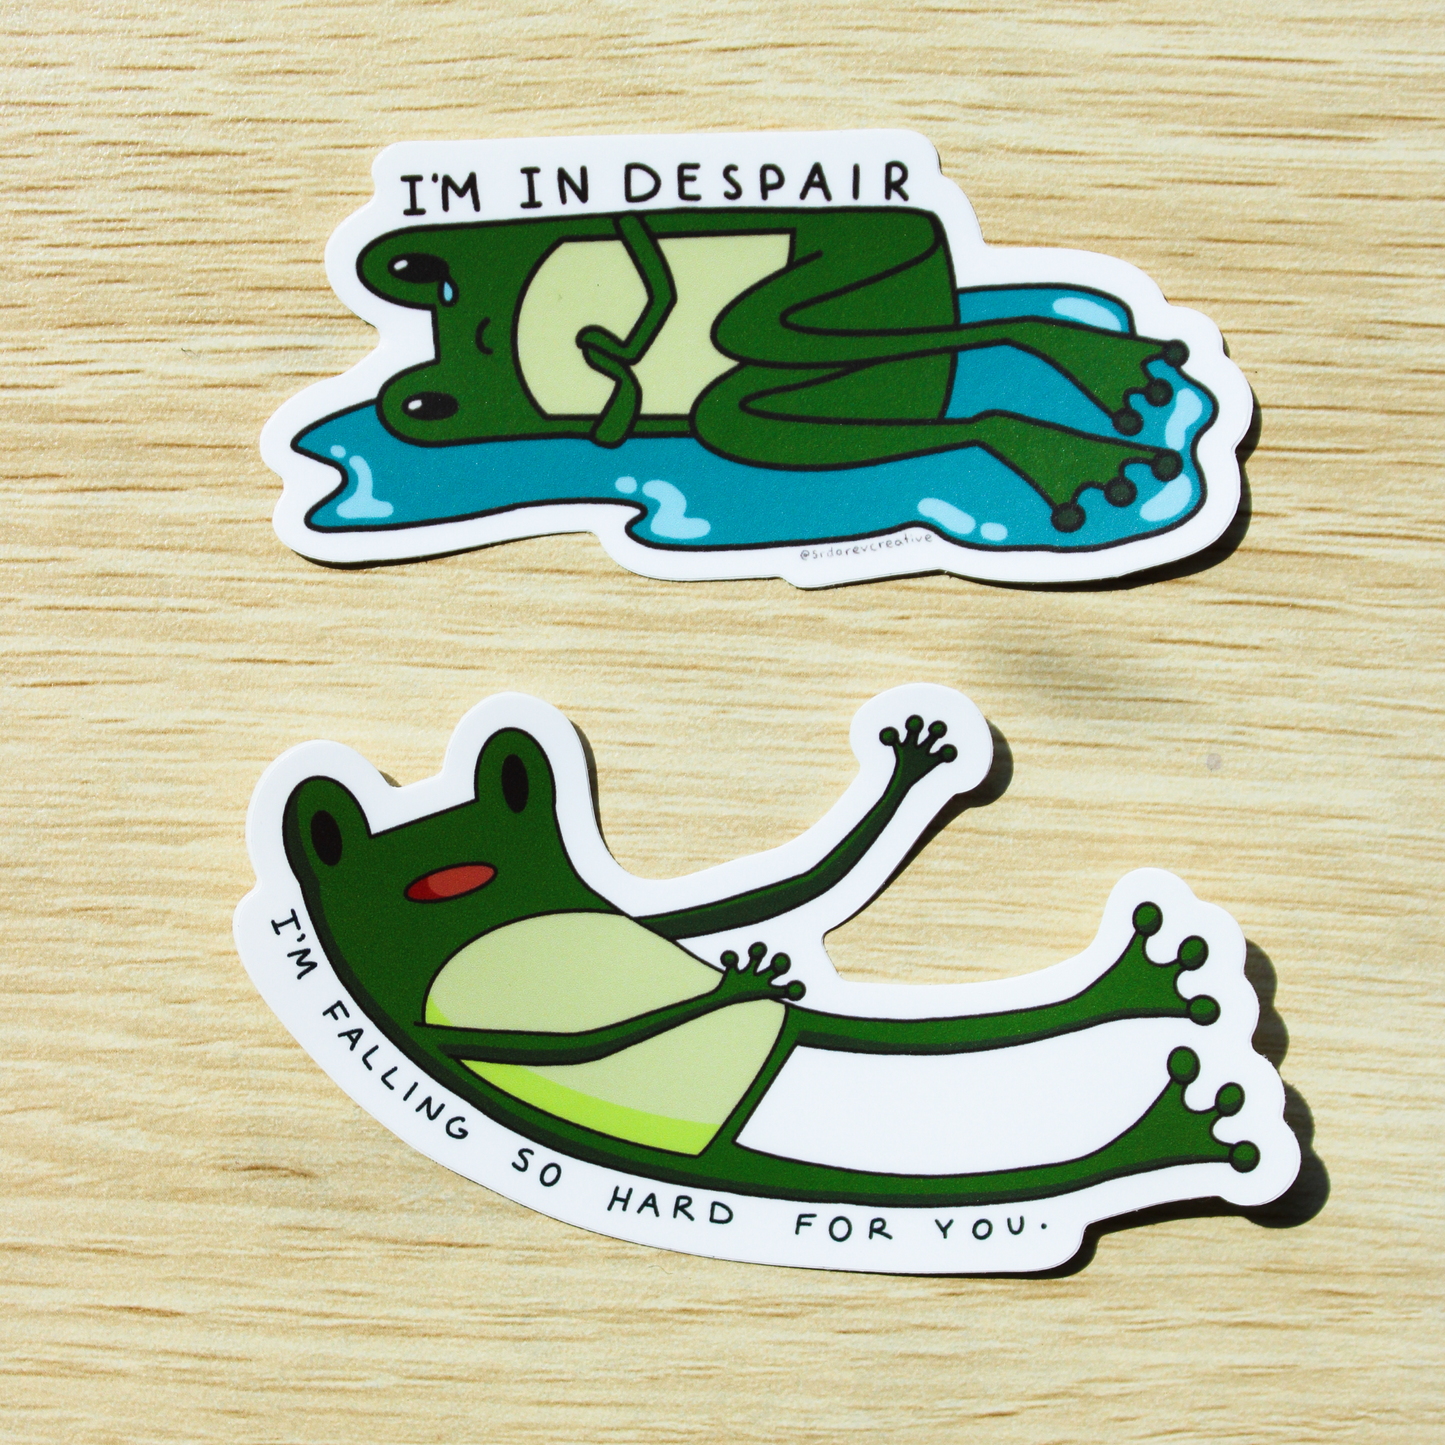 Hand holding a sticker of a cartoon frog lying down in a puddle with a tear falling down one eye and holding its hands. On top is written "I'M IN DESPAIR". On the bottom is another frog sticker of a cartoon frog falling with "I'M FALLING SO HARD FOR YOU" written underneath. Background is a wooden table.